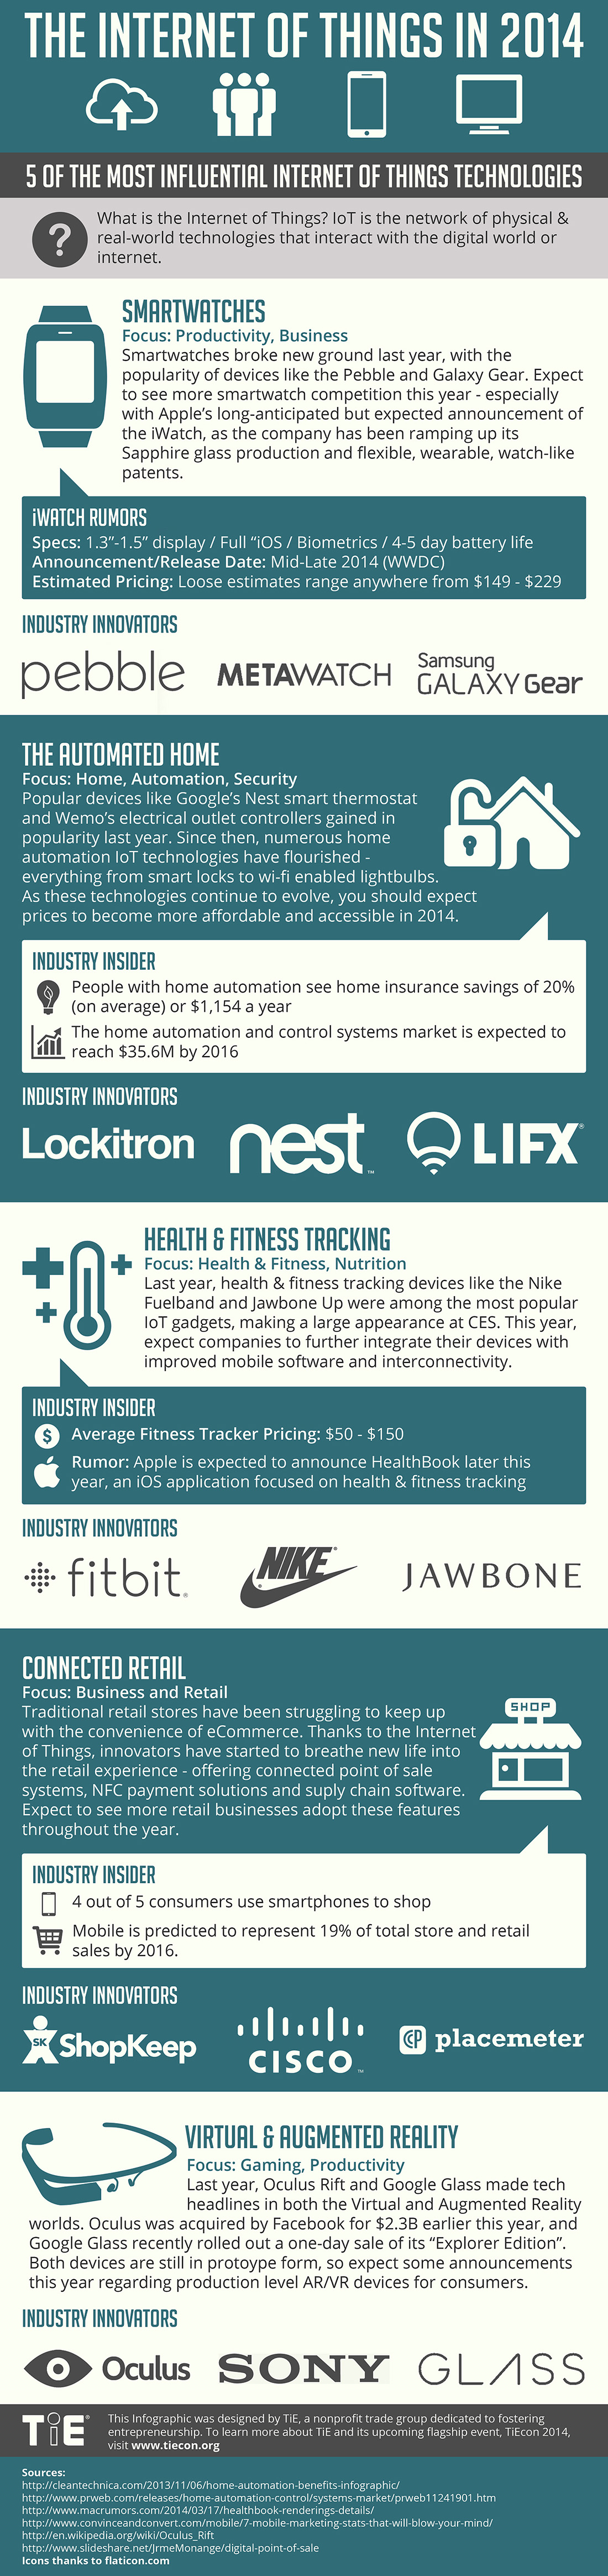 Final-IoT-2014-Infographic